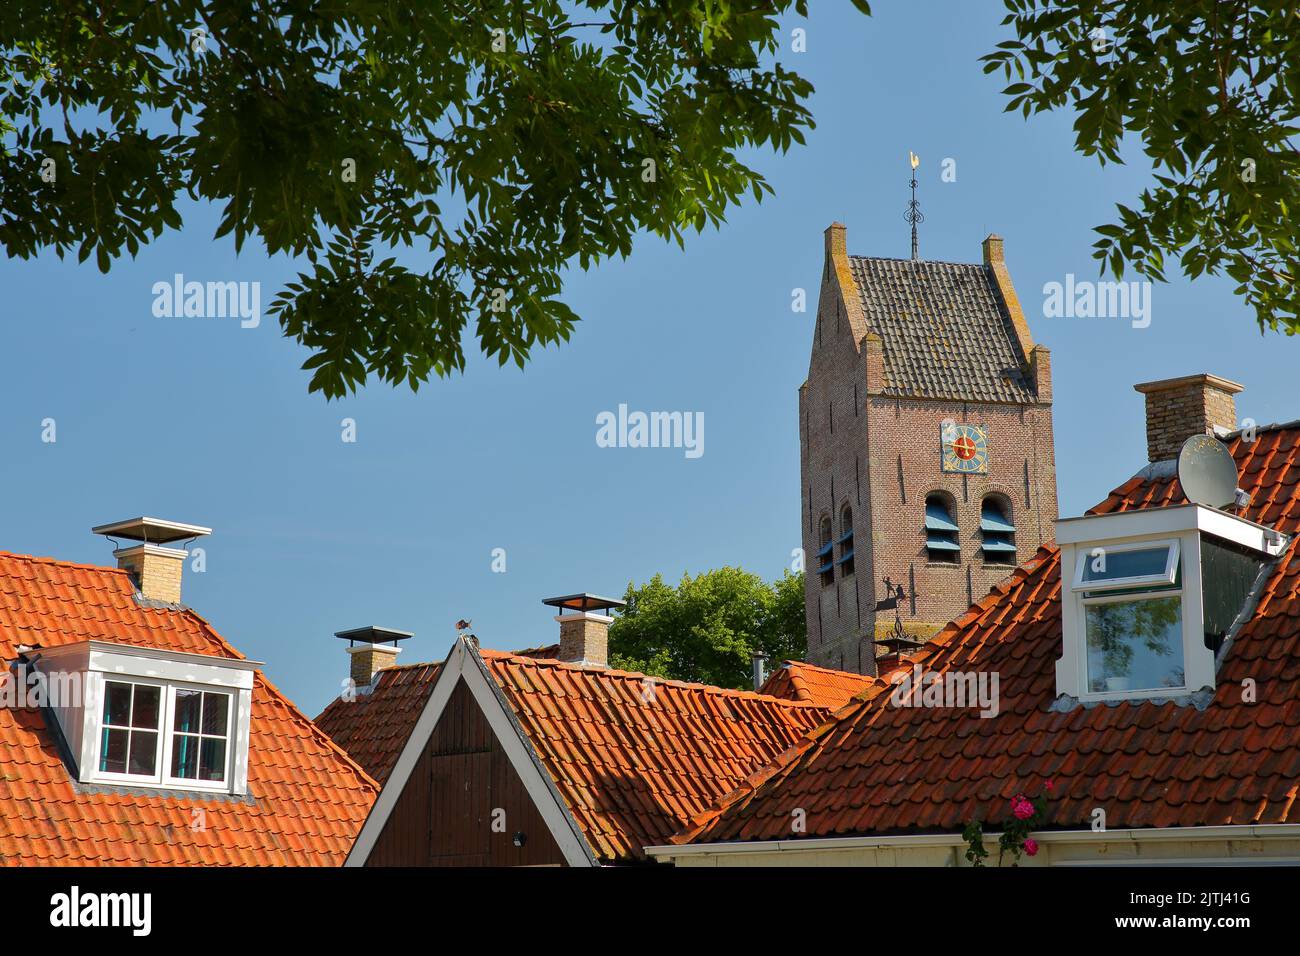 The roofs of historic houses and the massive bell tower of the Reformed Church (Hervormde Kerk) in Alligawier, Friesland, Netherlands Stock Photo